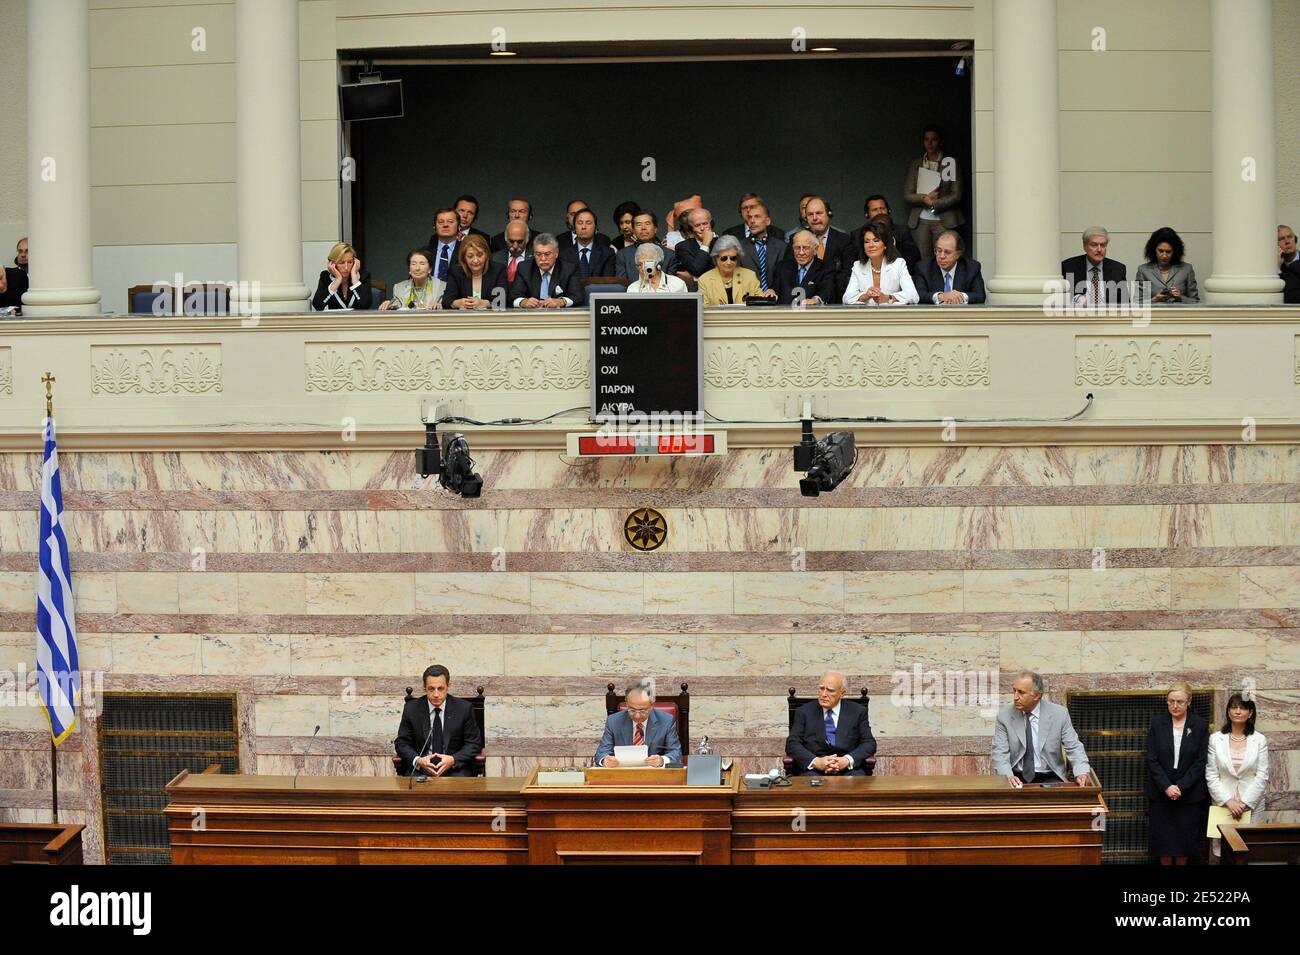 French President Nicolas Sarkozy, Greek President Karolos Papoulias and speaker of the Greek parliament Dimitri Sioufas addressing the parliament in Athens, Greece on June 6, 2008. Sarkozy arrived in Greece Friday for an official visit, the first by a French head of state in more than 25 years. Sarkozy was addressing the Greek parliament in a ceremony only accorded to three foreign presidents in the past: his predecessor Charles de Gaulle and US presidents Dwight Eisenhower and George Bush Sr. Photo by Mousse/ABACAPRESS.COM Stock Photo